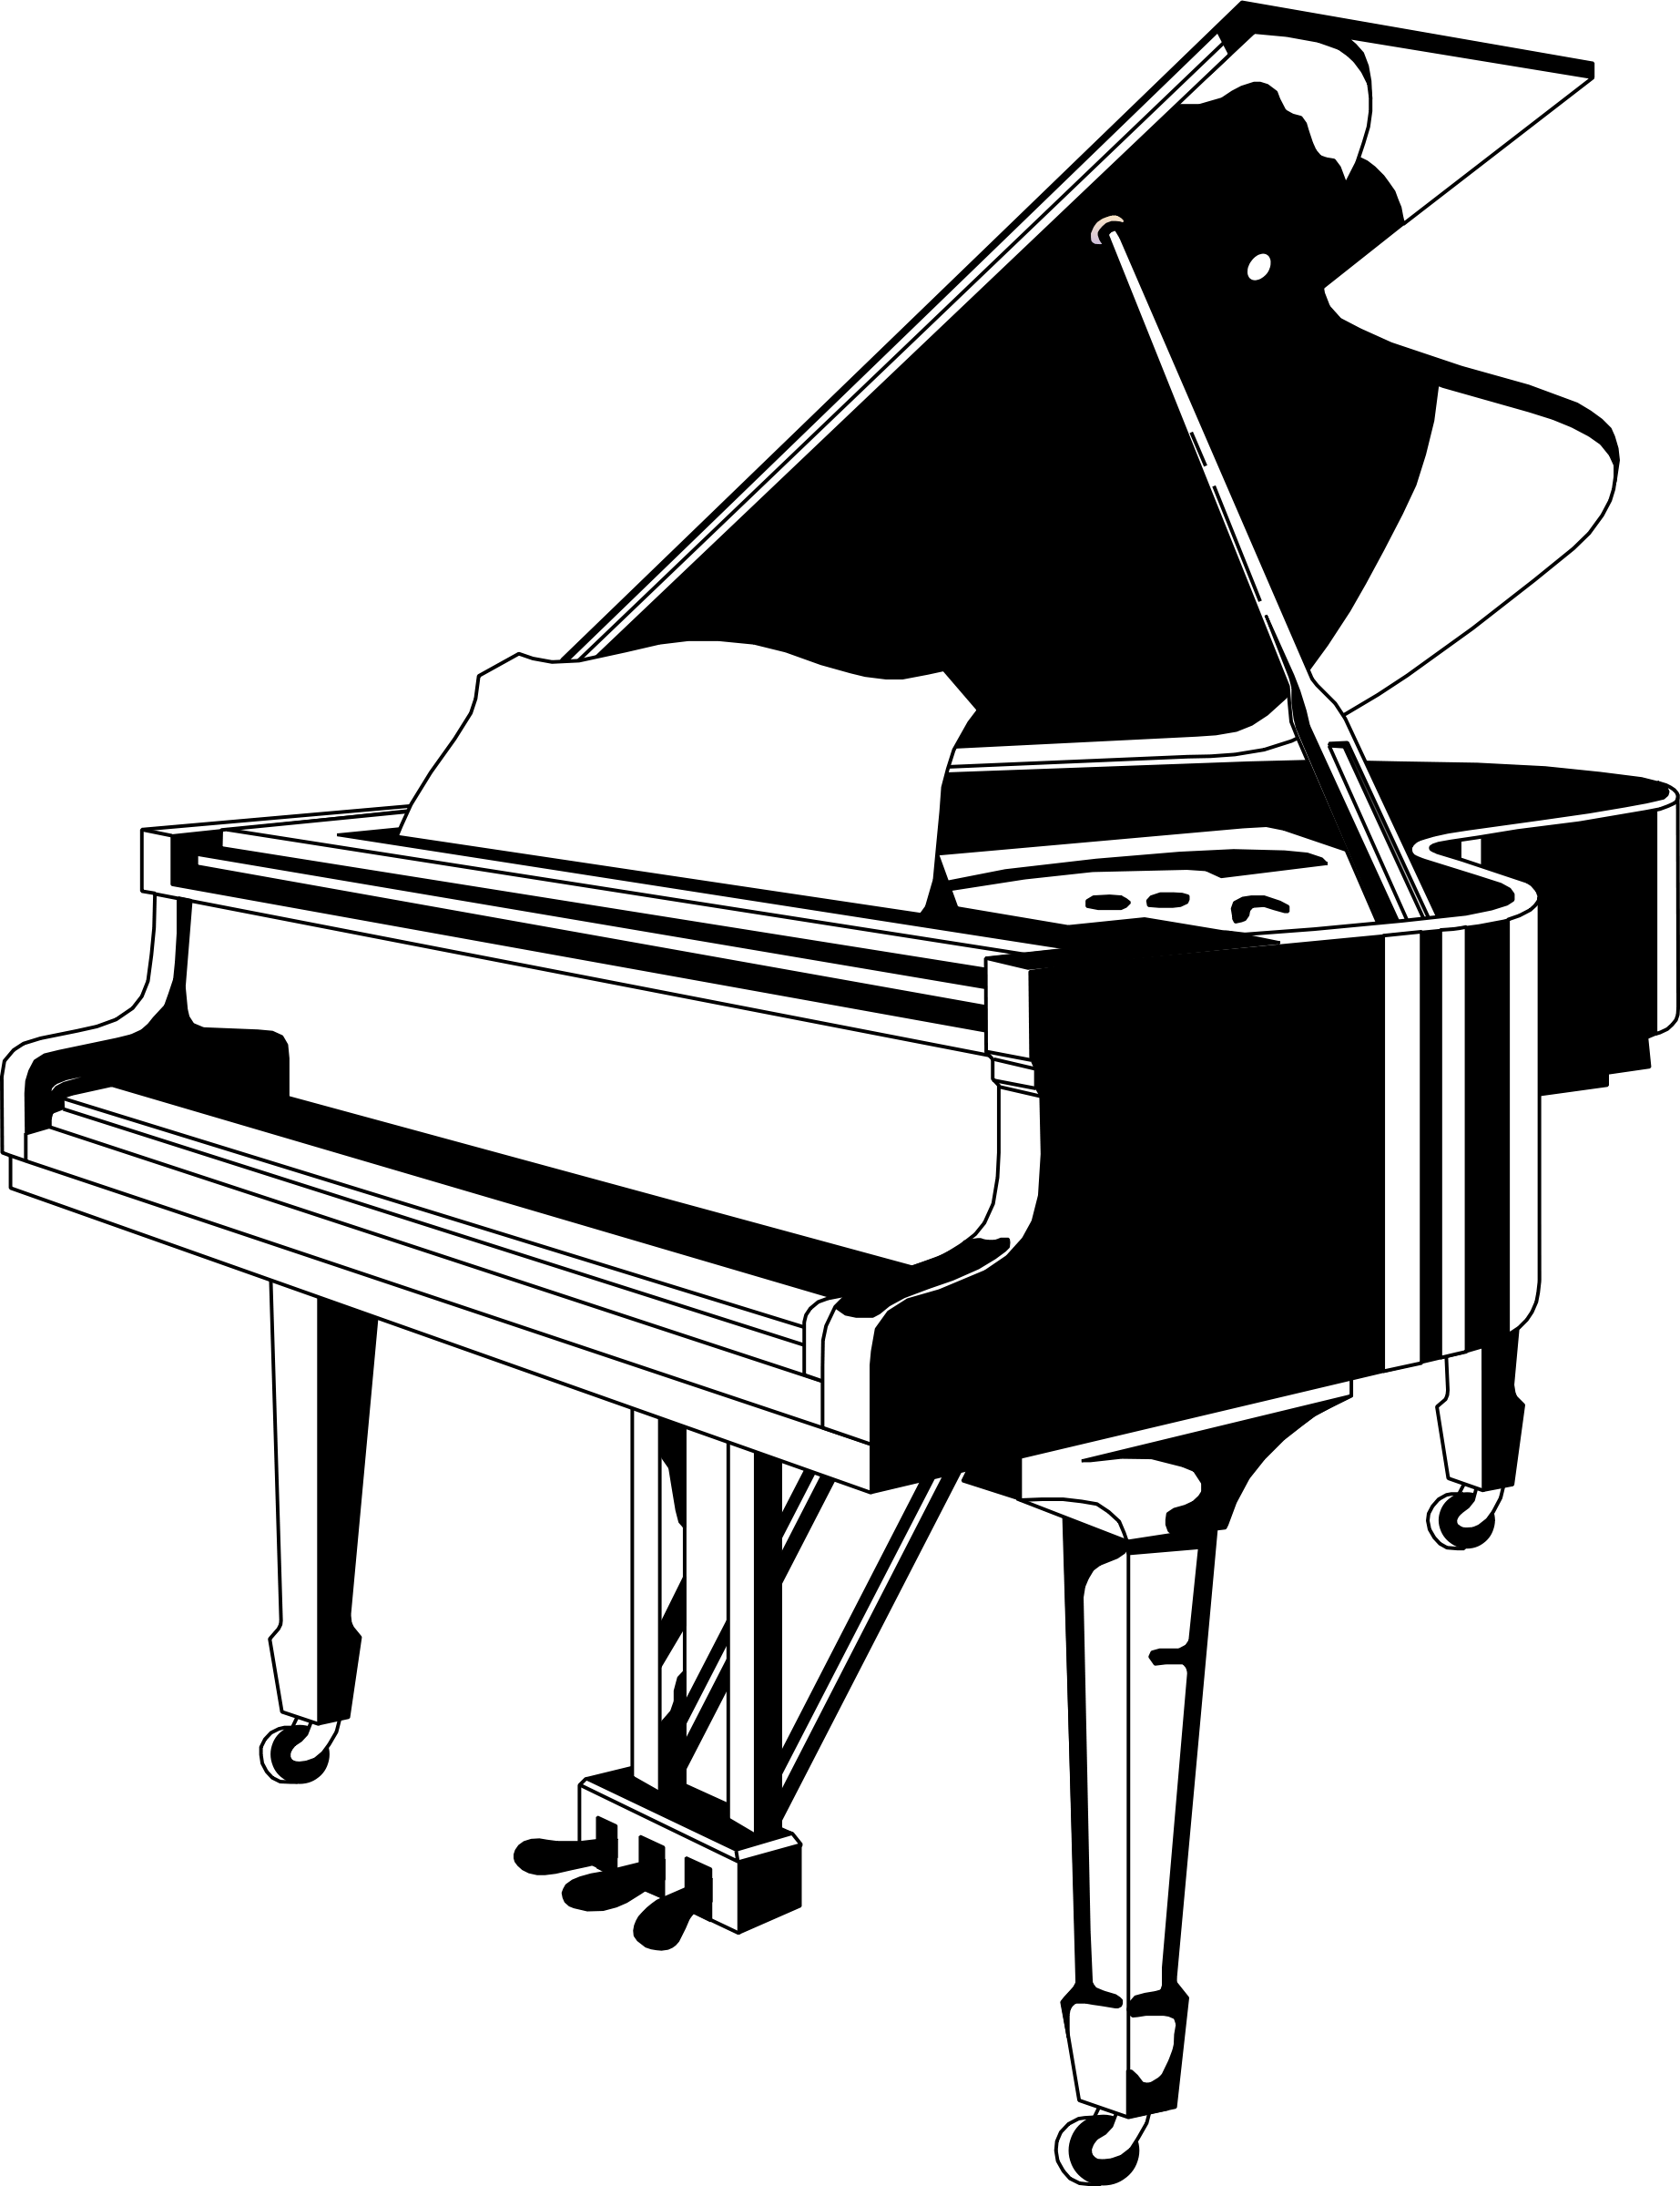 Piano clip art black and white free clipart images